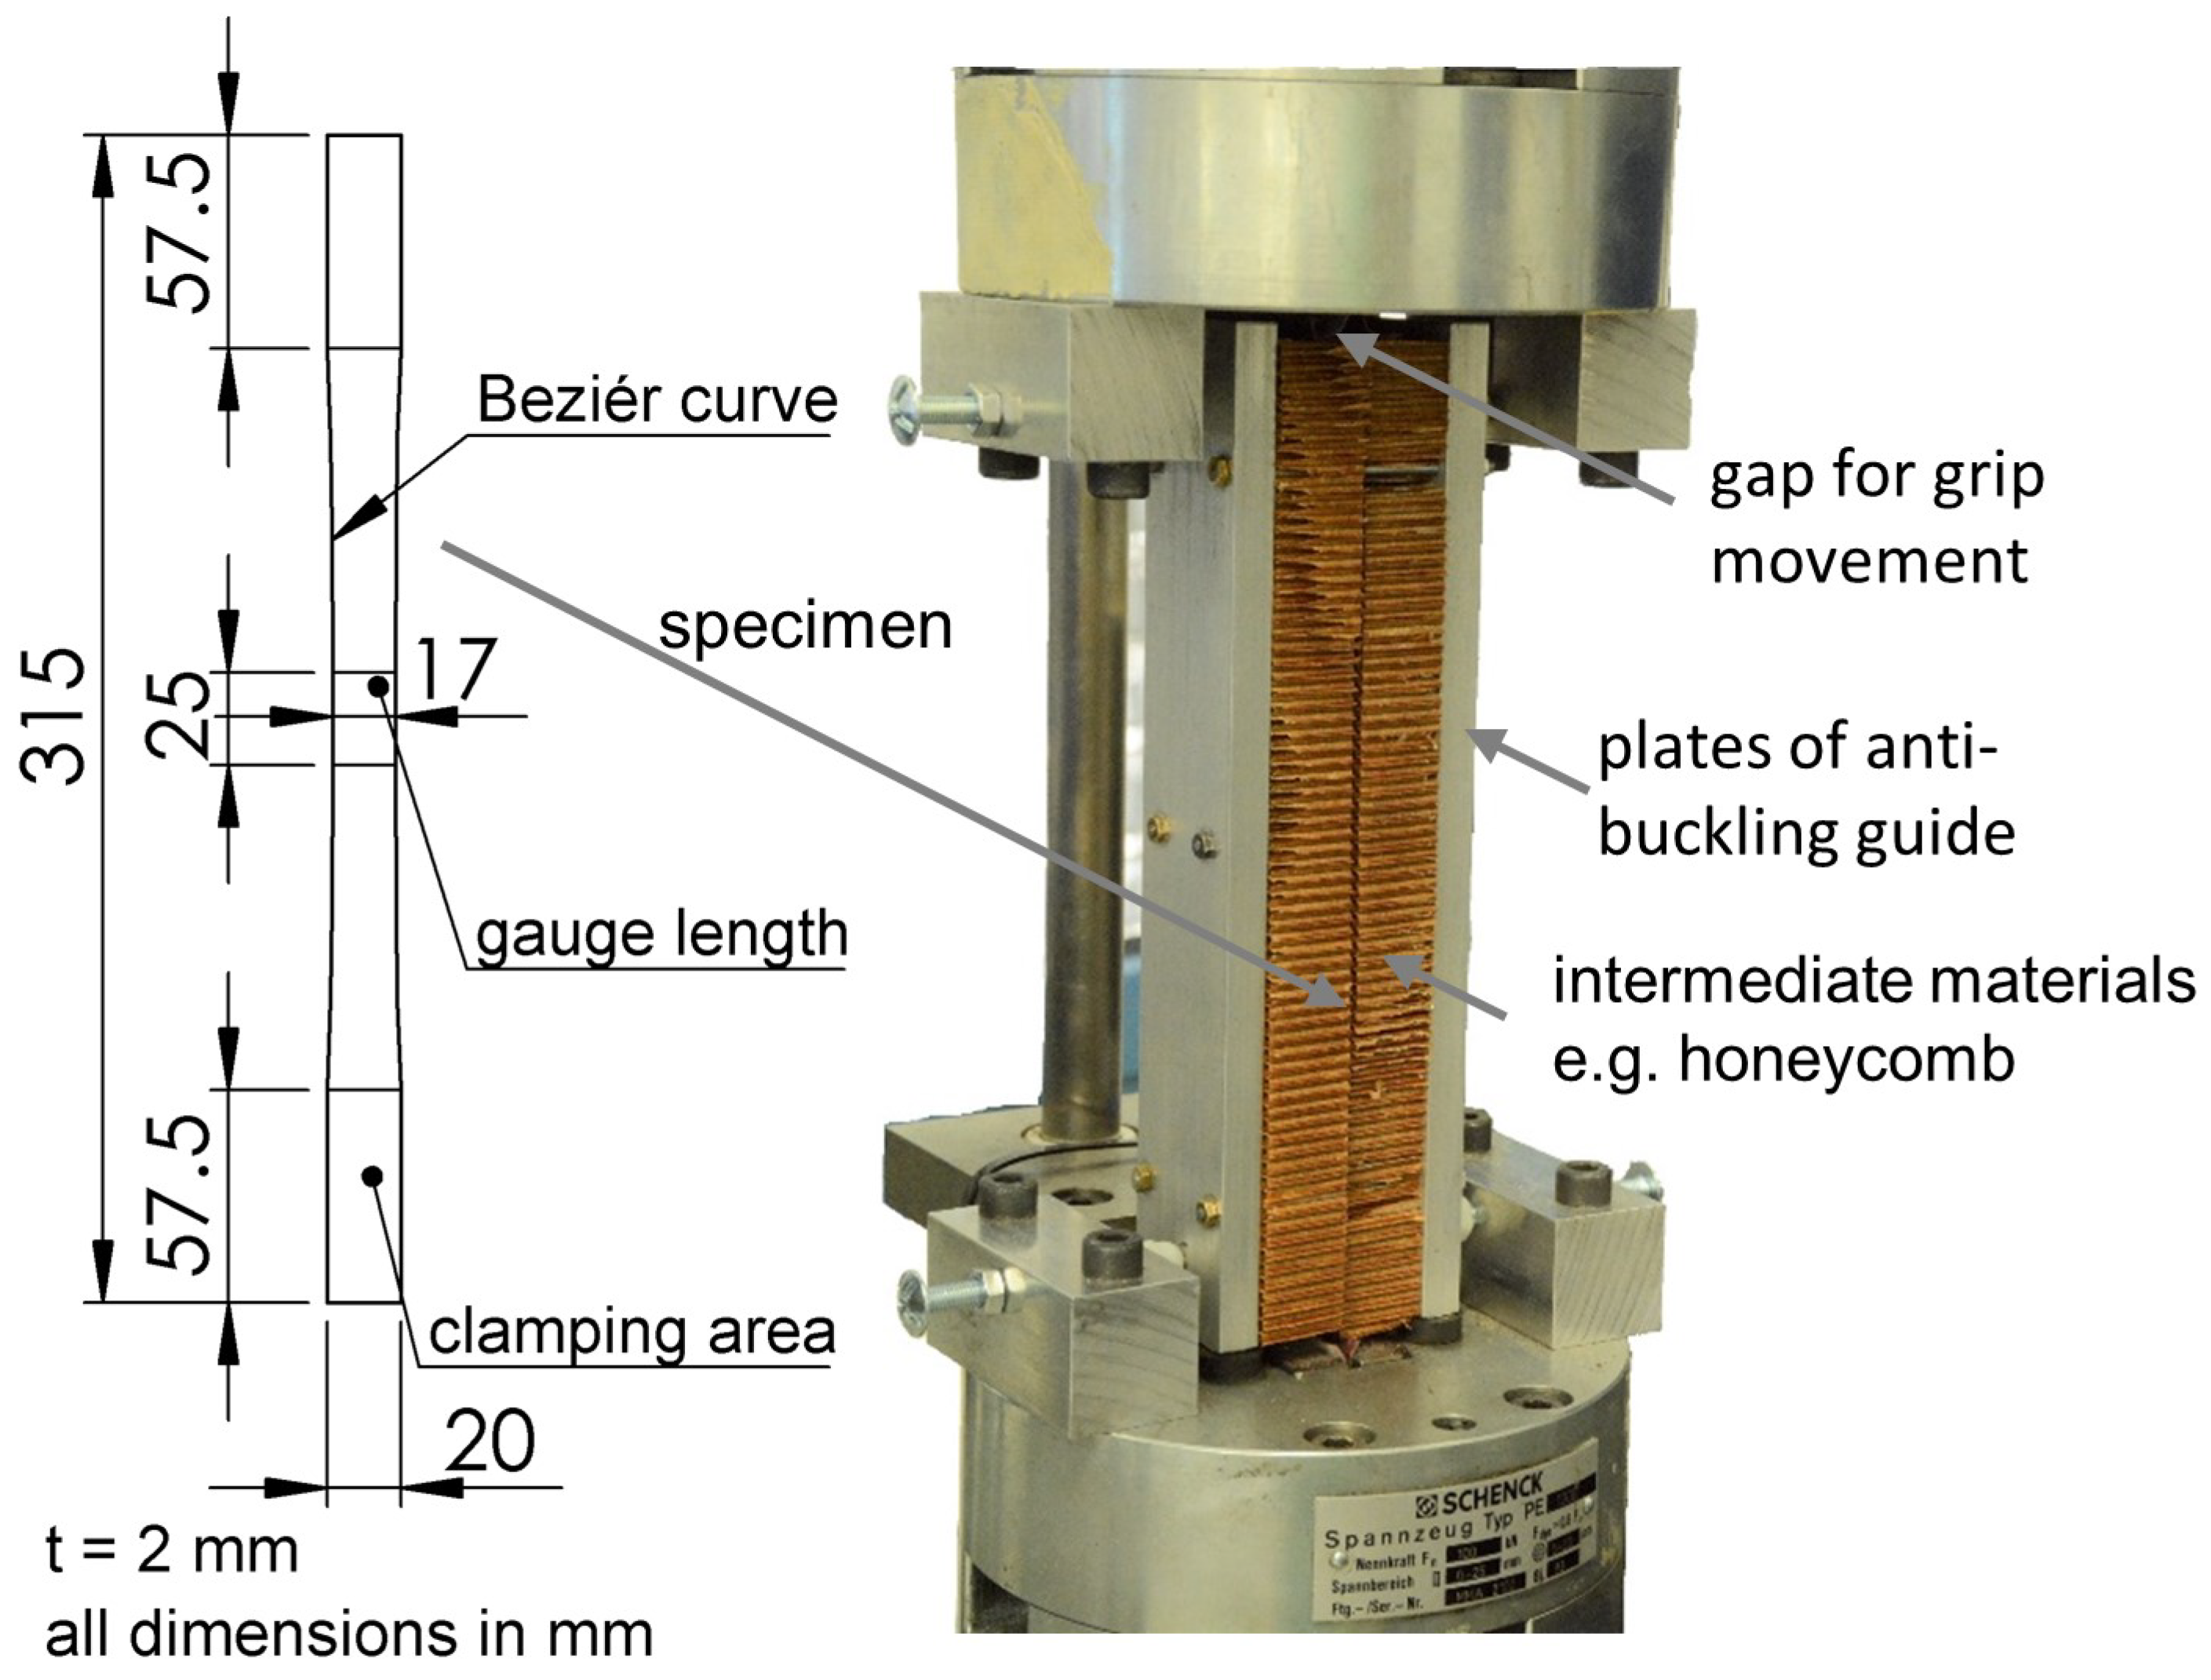 Through-thickness compression testing of the honeycomb core